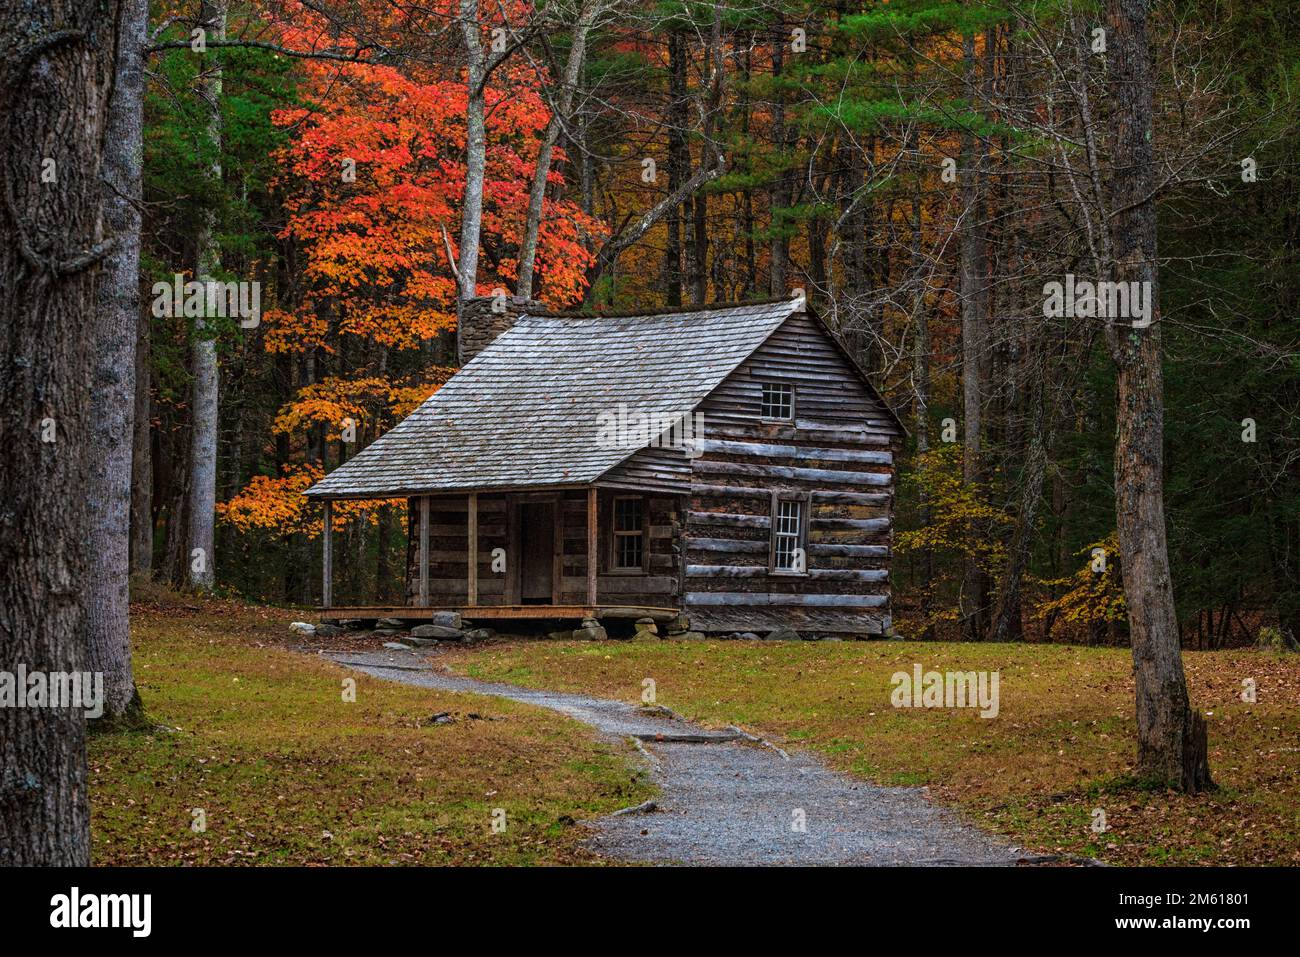 Autumn view of Carter Shields cabin in the Cades Cove section of Great Smoky Mountain National Park in Tennessee Stock Photo